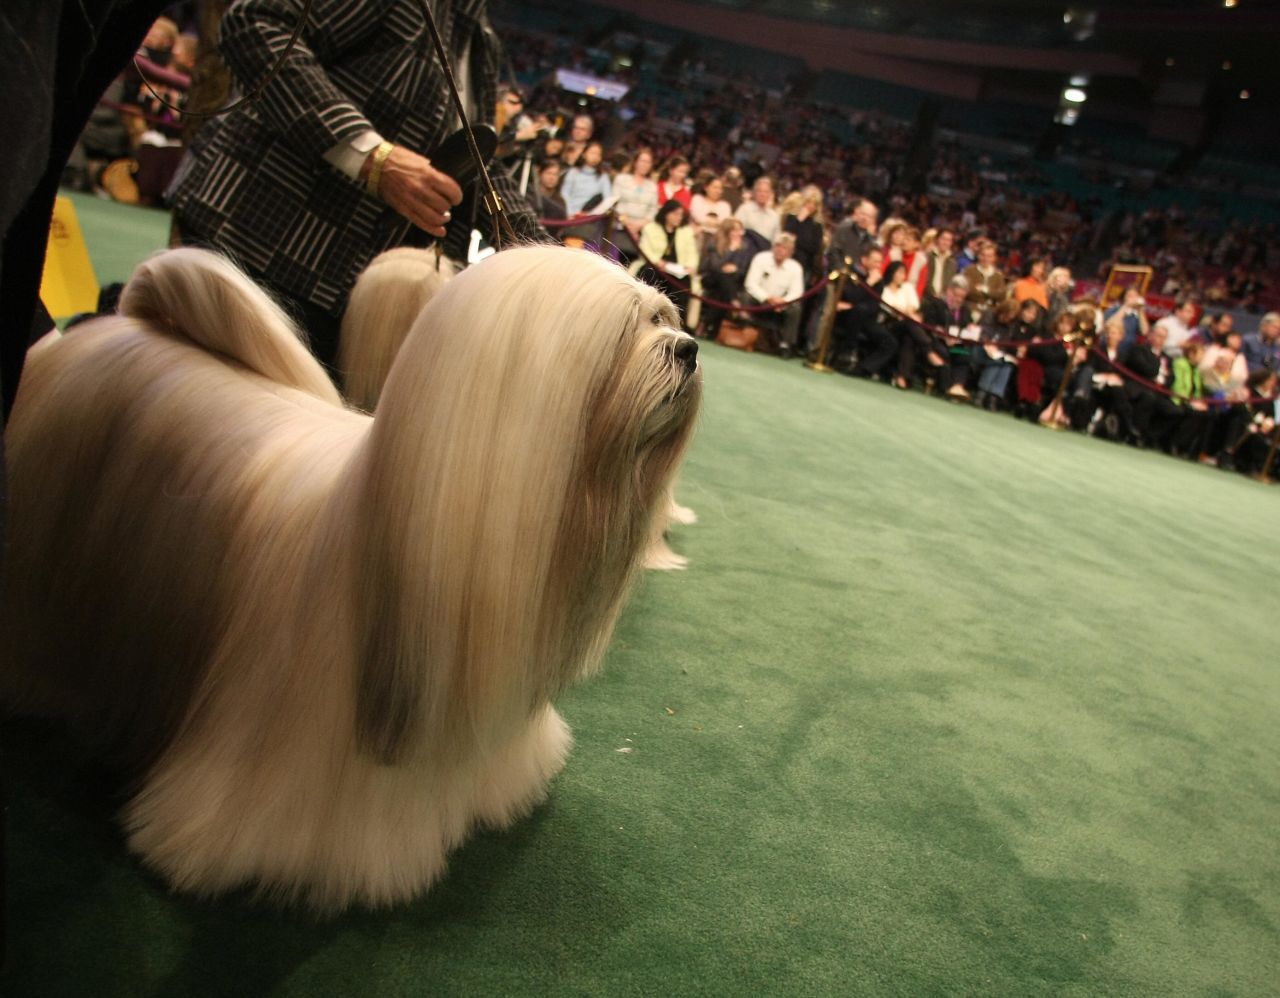 The <a href="http://www.westminsterkennelclub.org/breedinformation/non-sporting/lhasaaps.html" target="_blank" target="_blank">Tibetan Lhasa Apso</a> breed was developed by dalai lamas as guard dogs. These dogs have excellent hearing, which helped their masters protect temples.